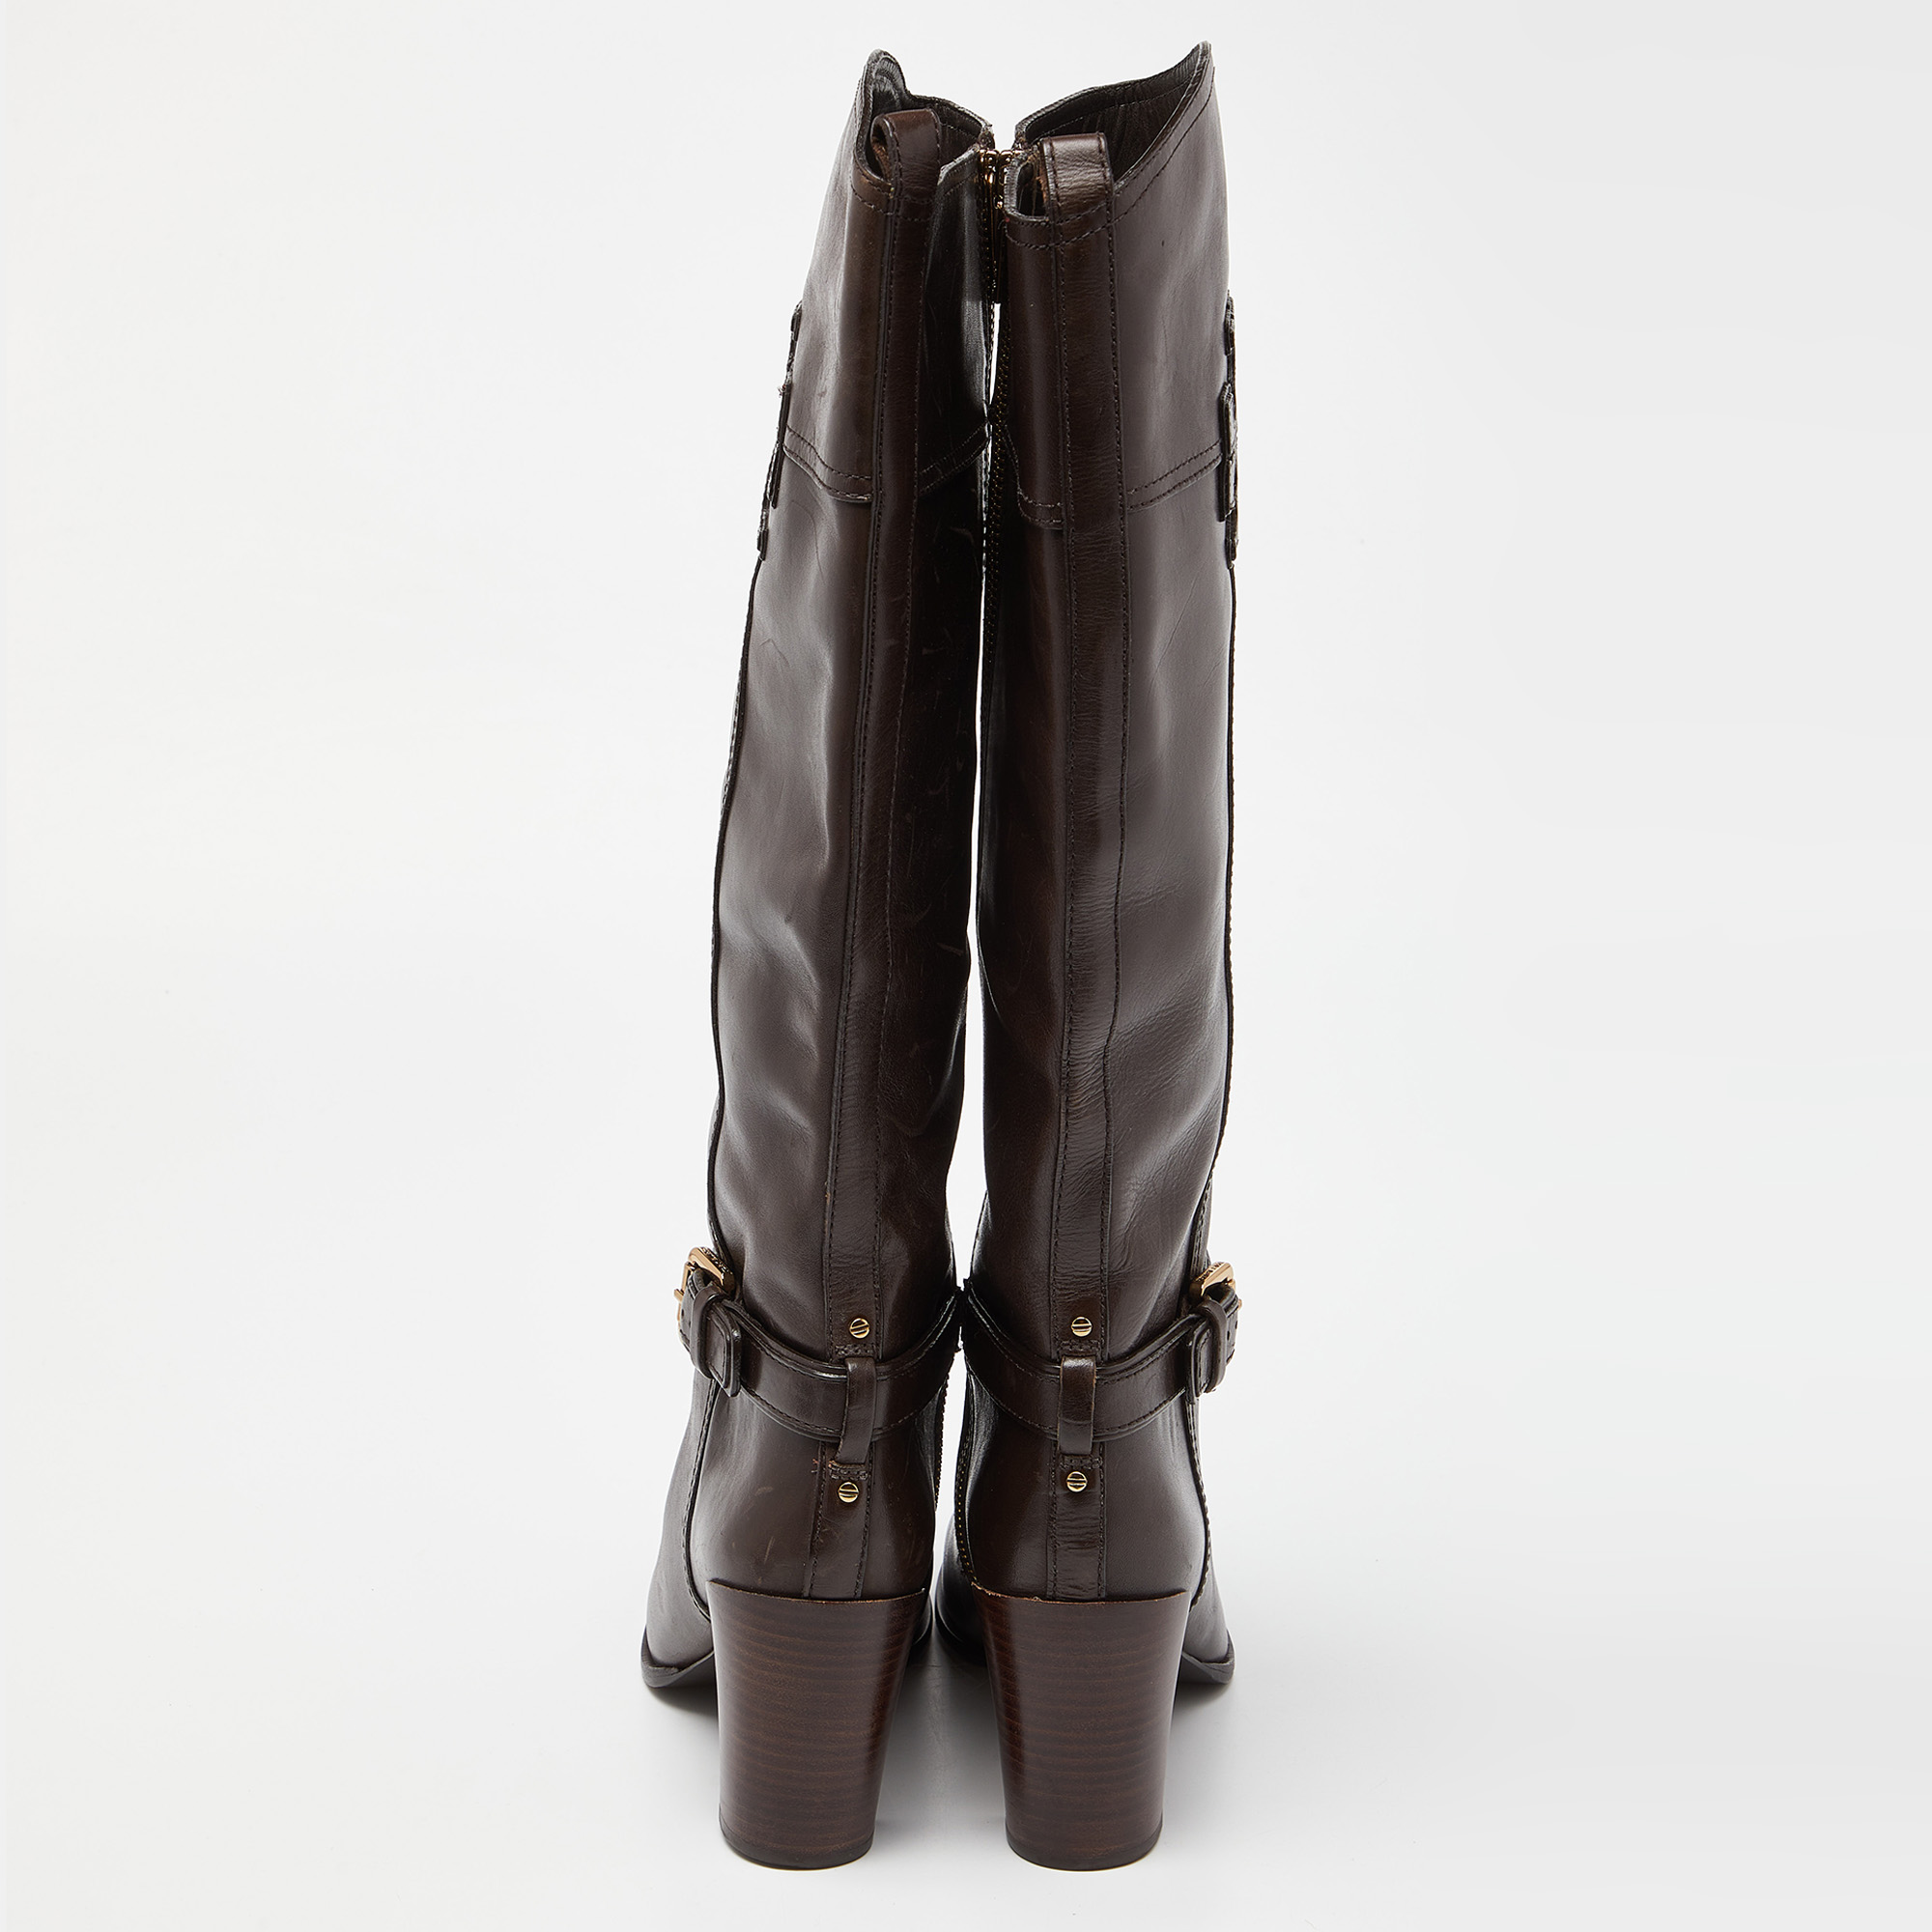 Tory Burch Brown Leather Knee Length Boots Size 38.5